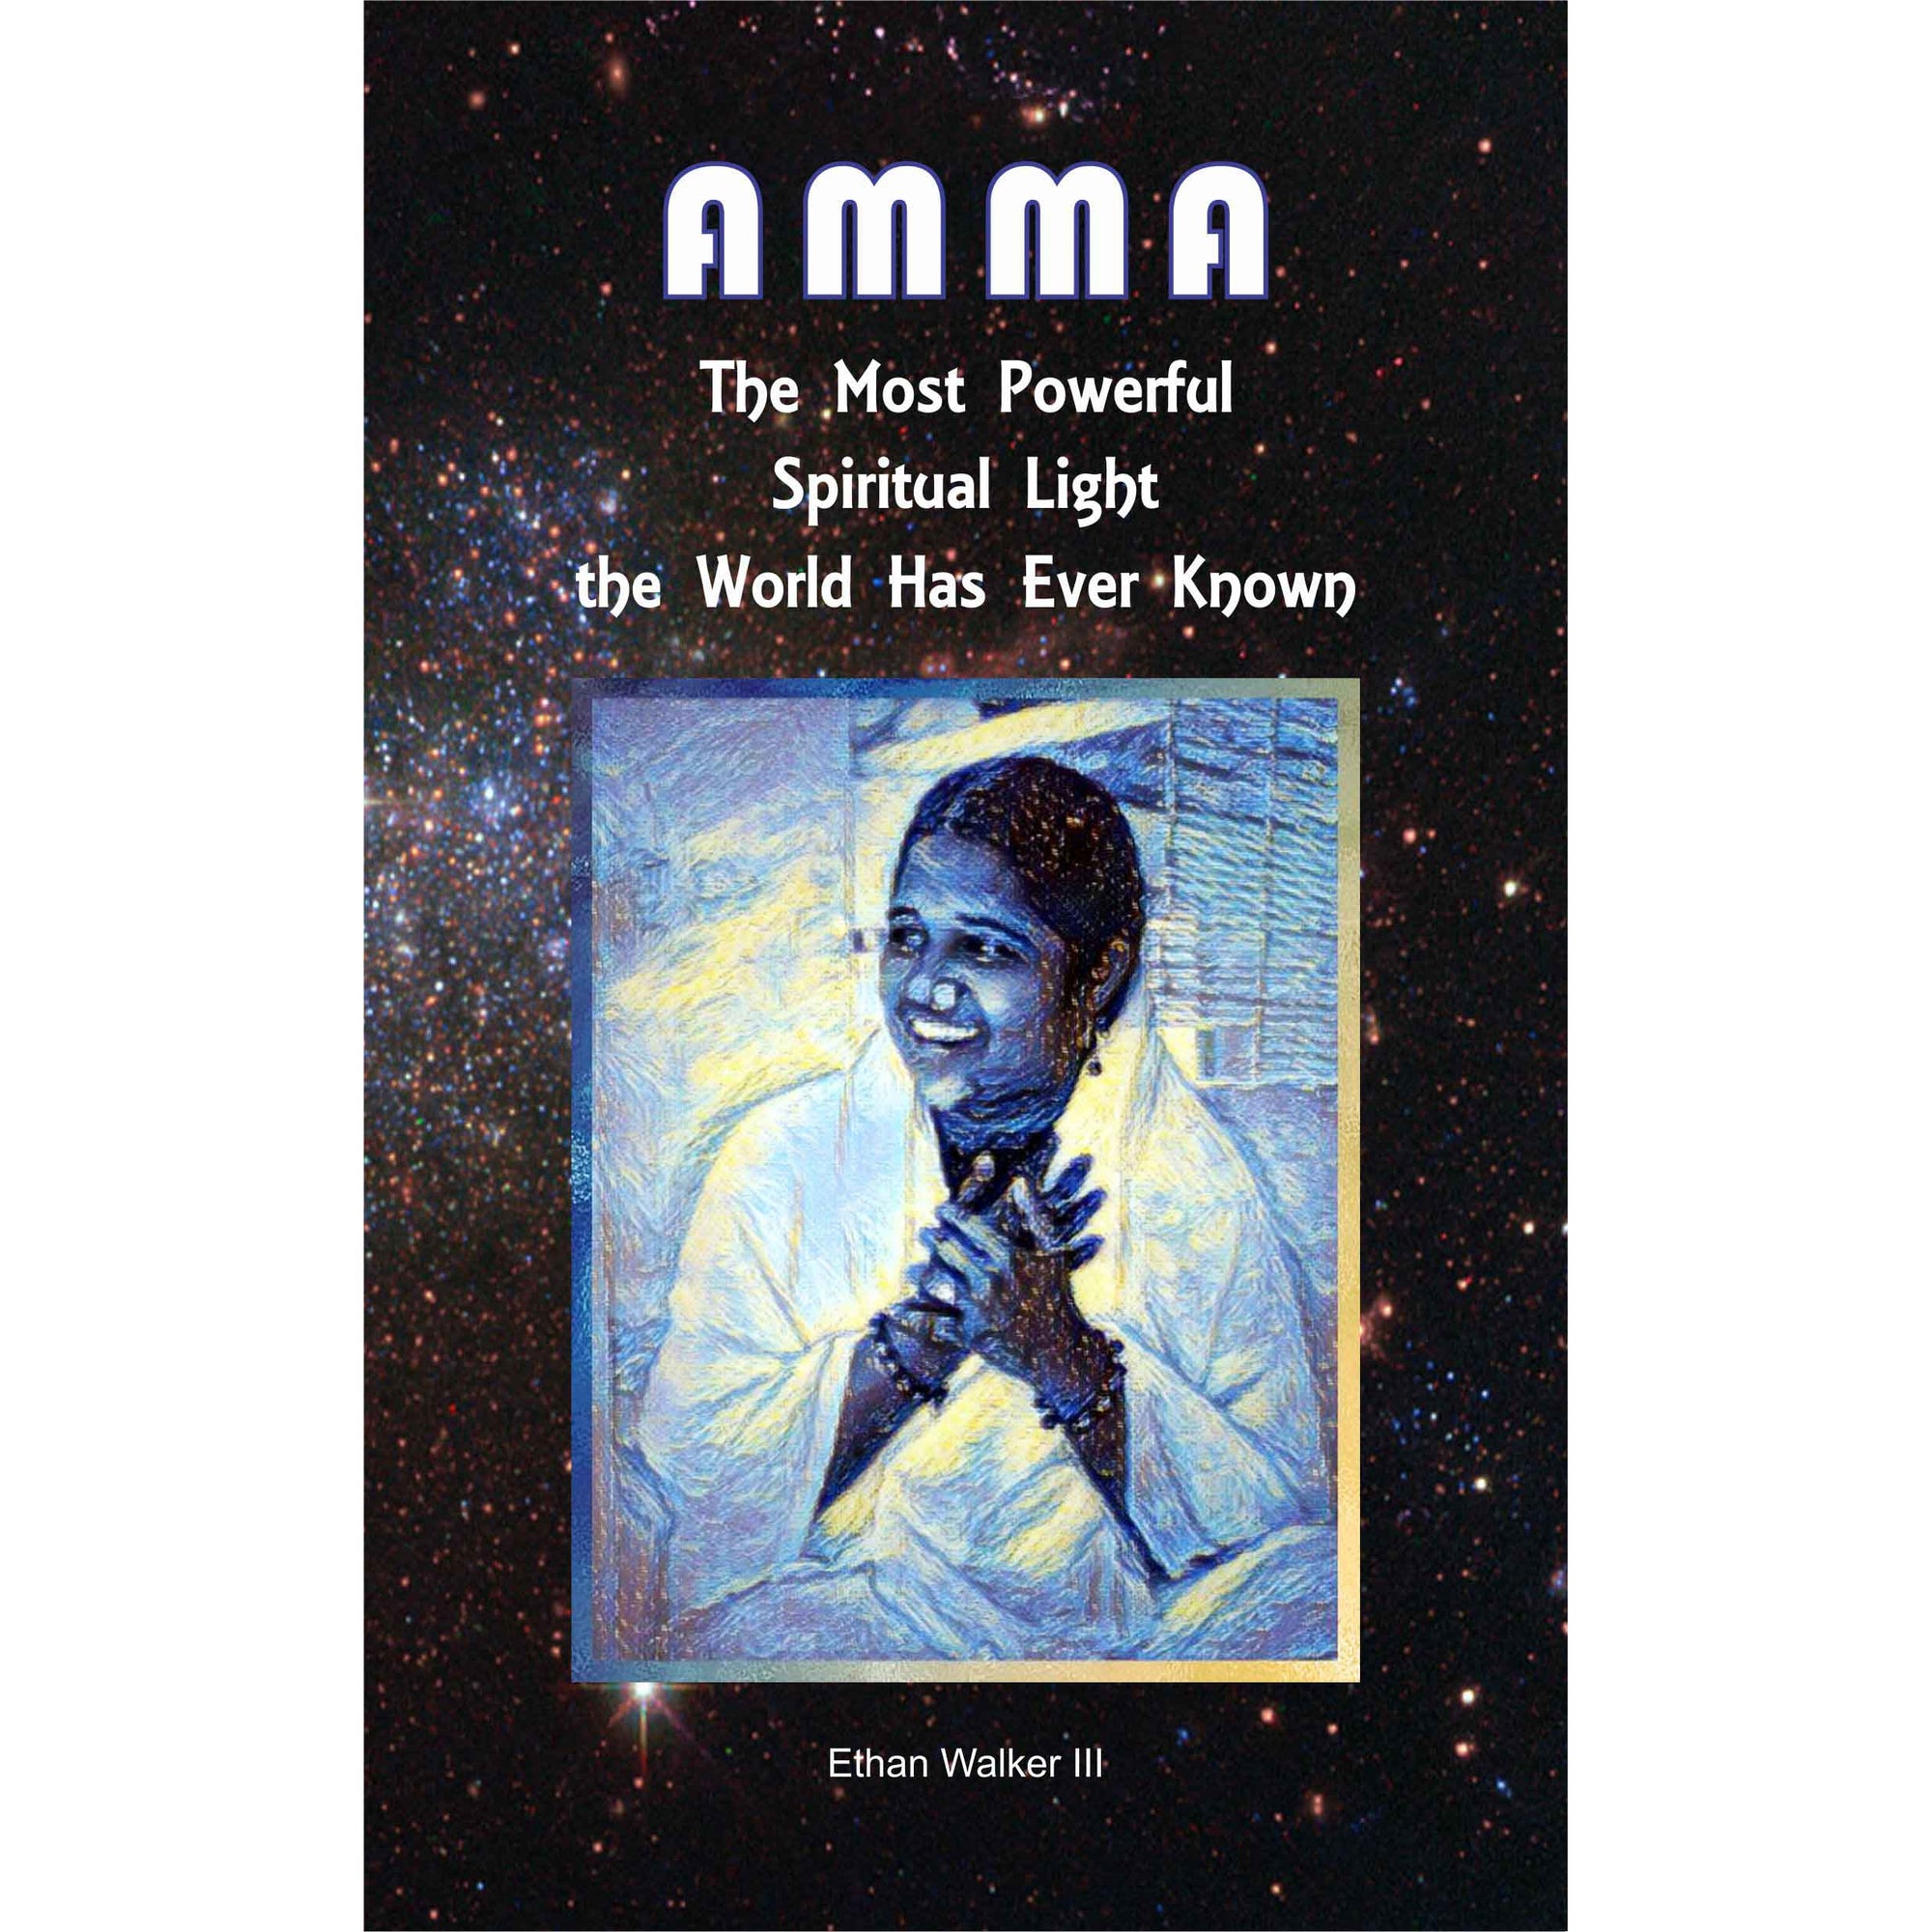 Amma – The Most Powerful Spiritual Light the World has ever Known